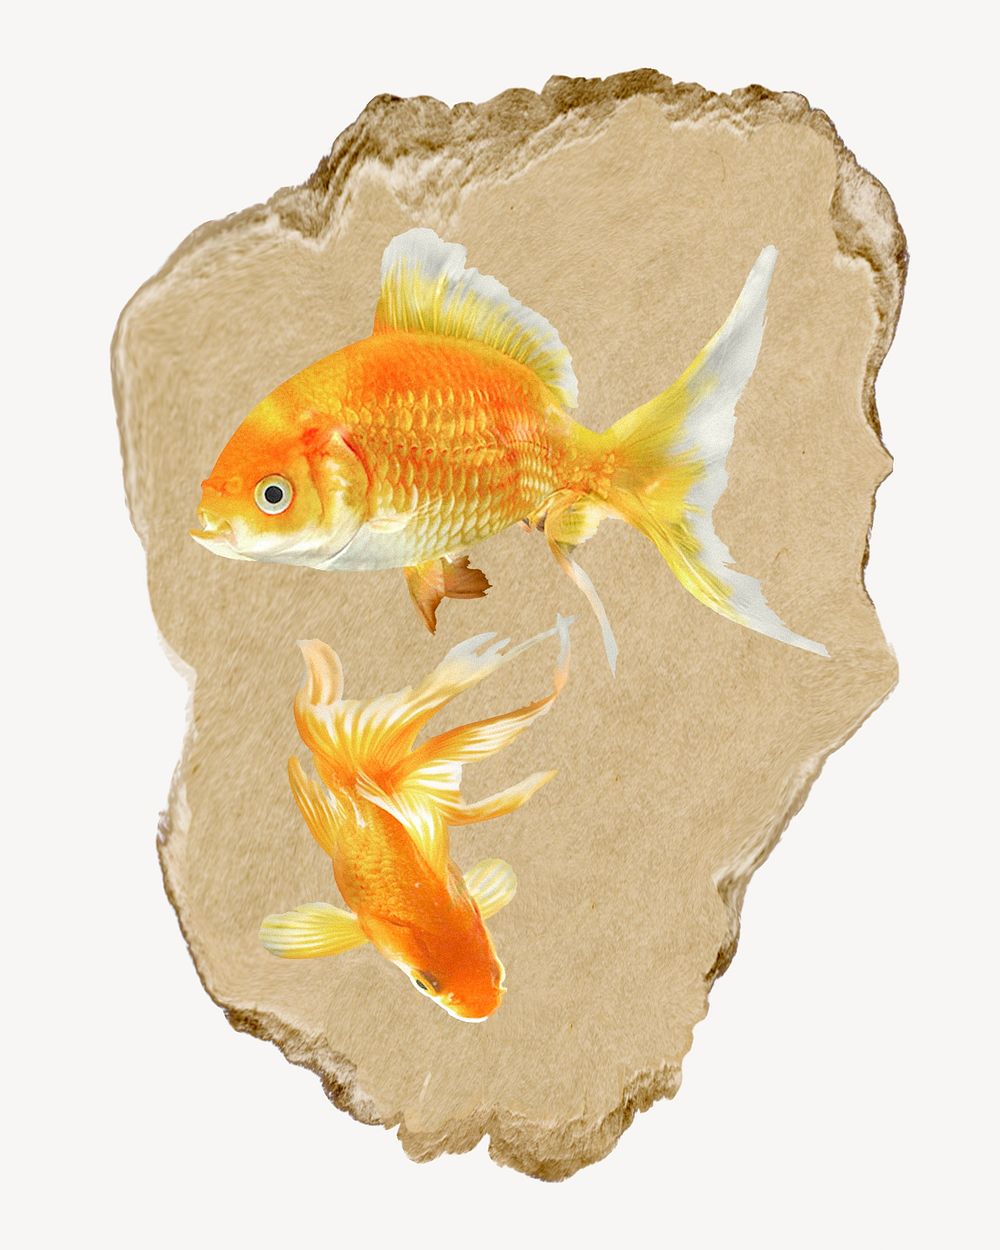 Goldfish, ripped paper collage element